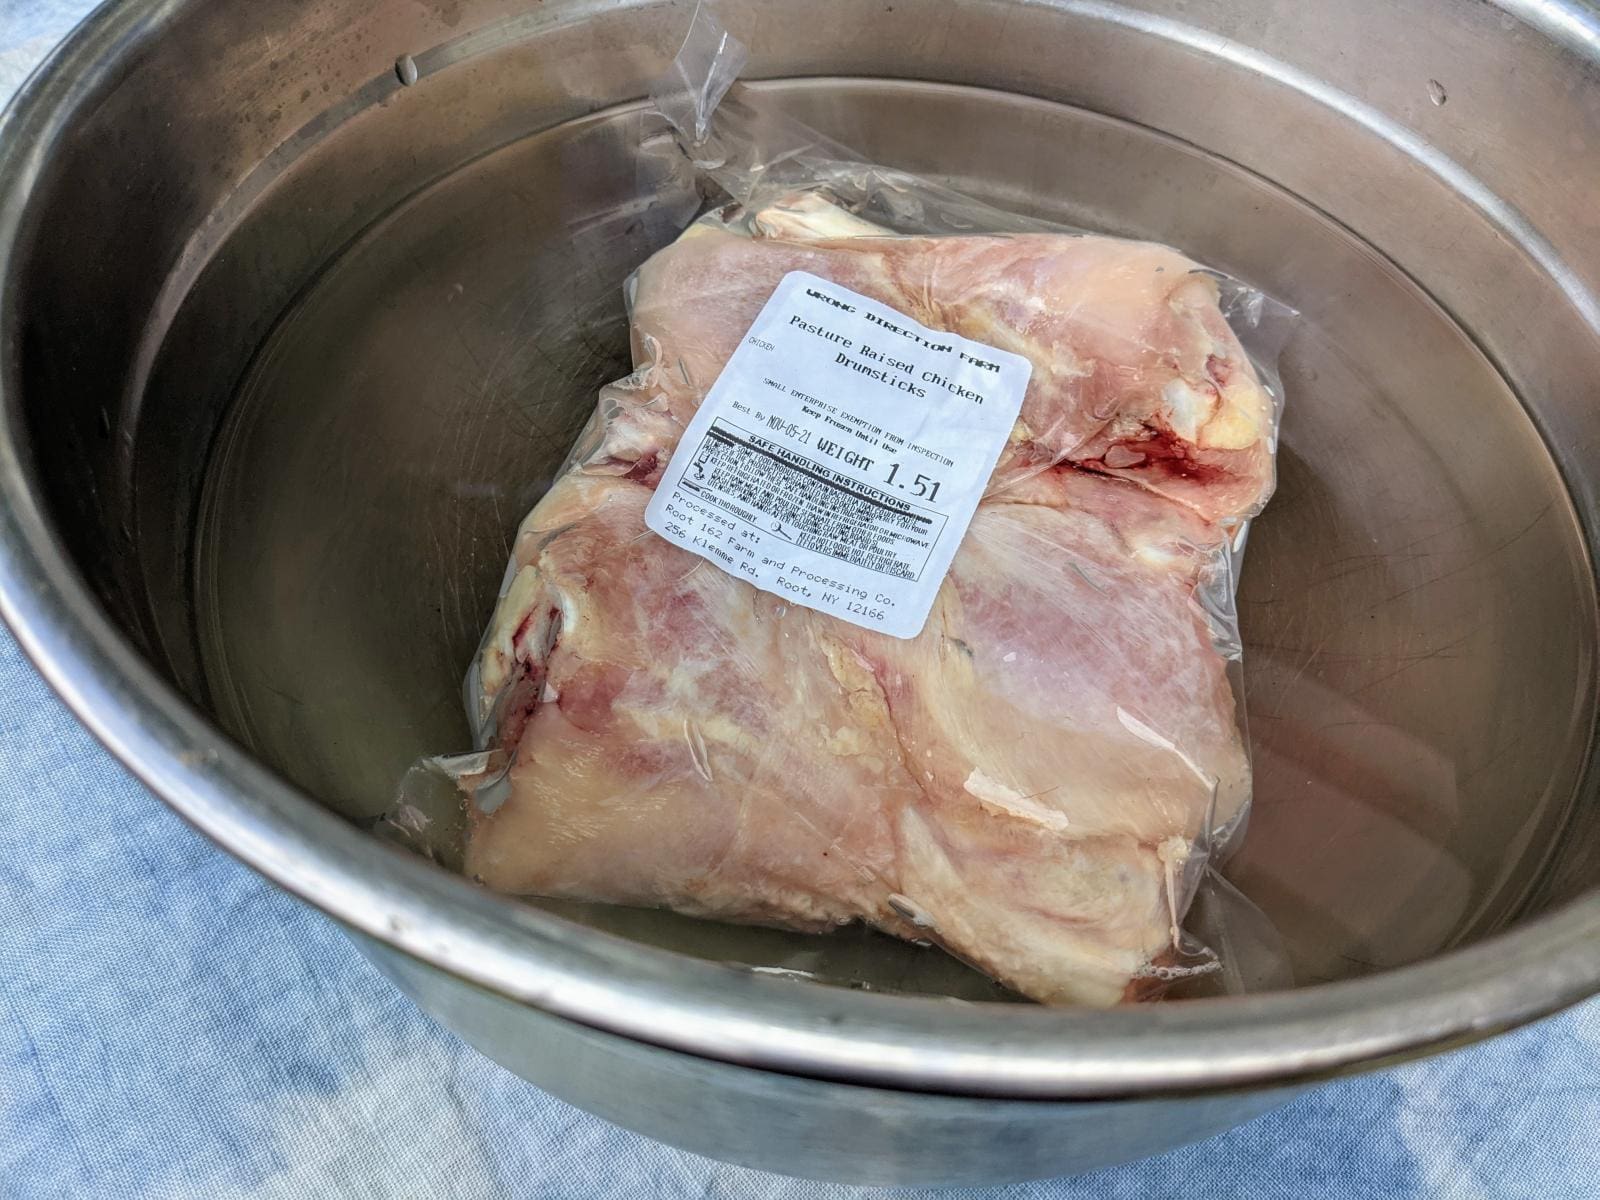 To save time, this image shows a package of pasture raised chicken defrosting submerged in a bowl of water as it is about to be placed in the refrigerator.